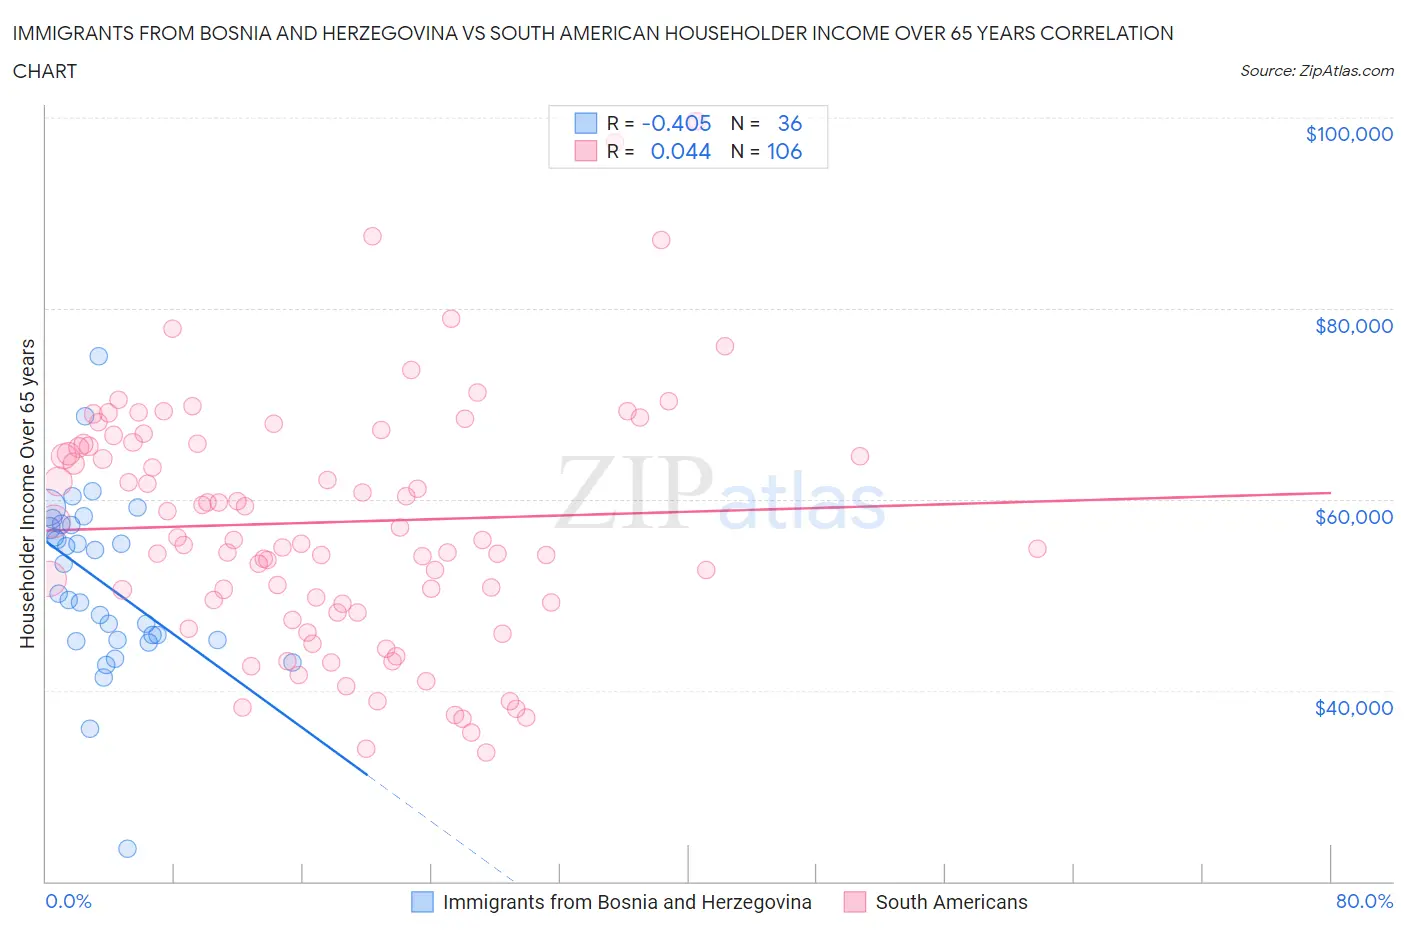 Immigrants from Bosnia and Herzegovina vs South American Householder Income Over 65 years